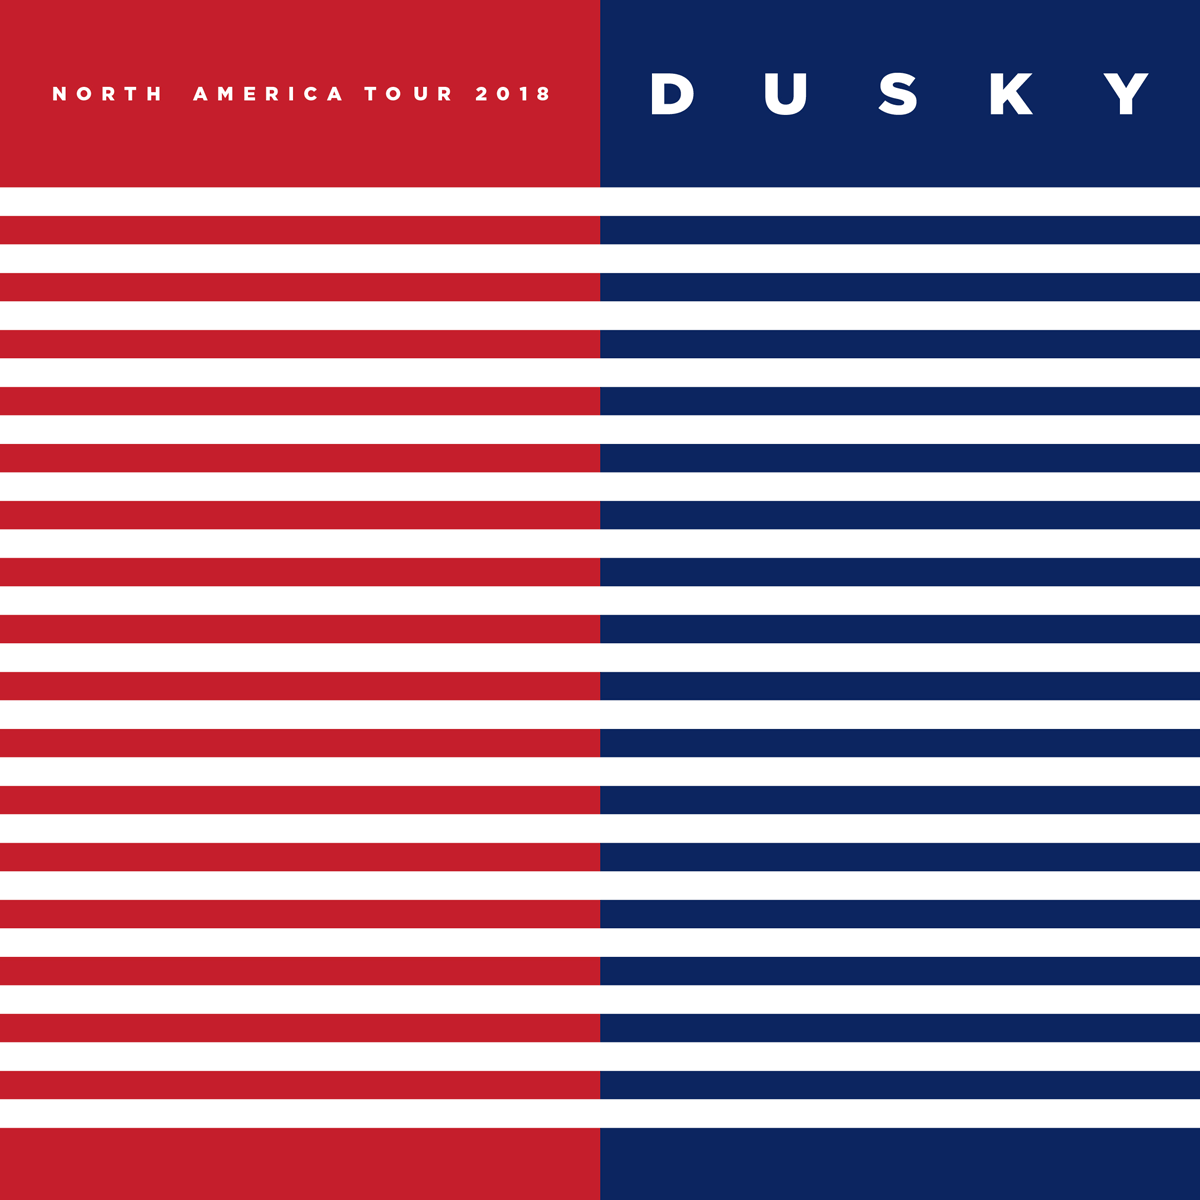 Branding for Dusky, US Tour 2018 by UTILE